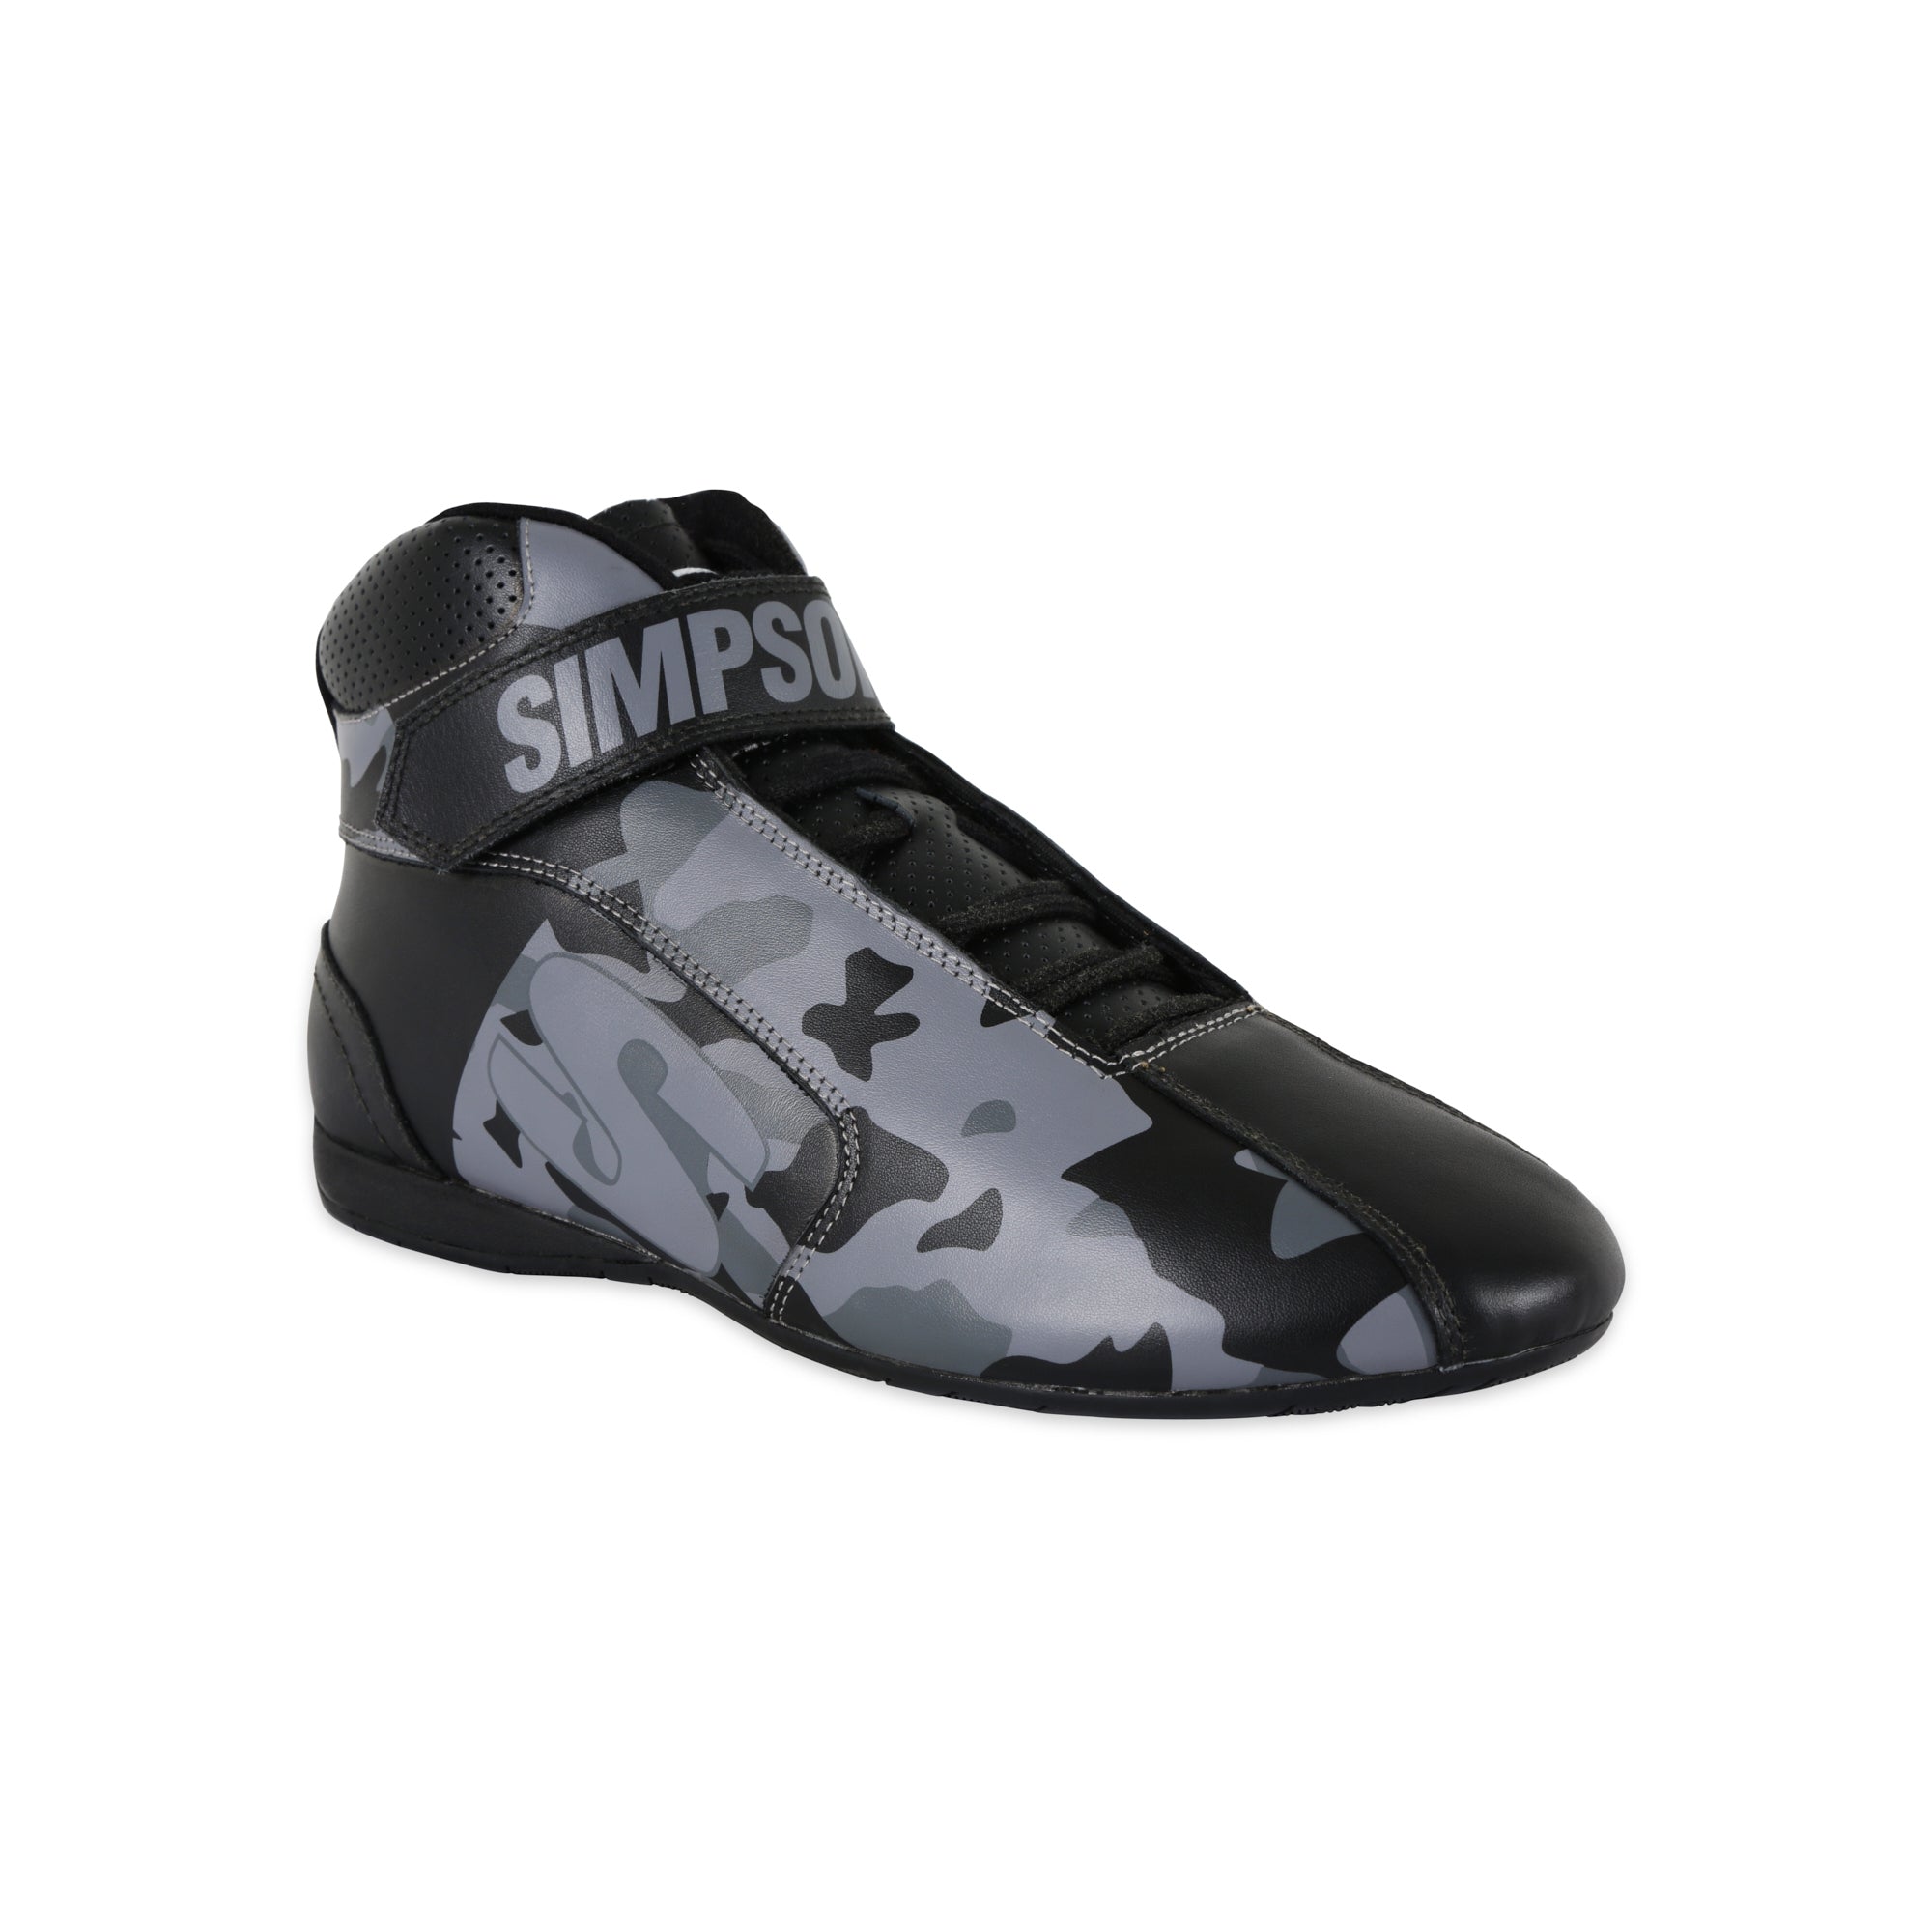 Simpson Shoe DNA X2 Blackout Size 11 Safety Clothing Driving Shoes and Boots main image